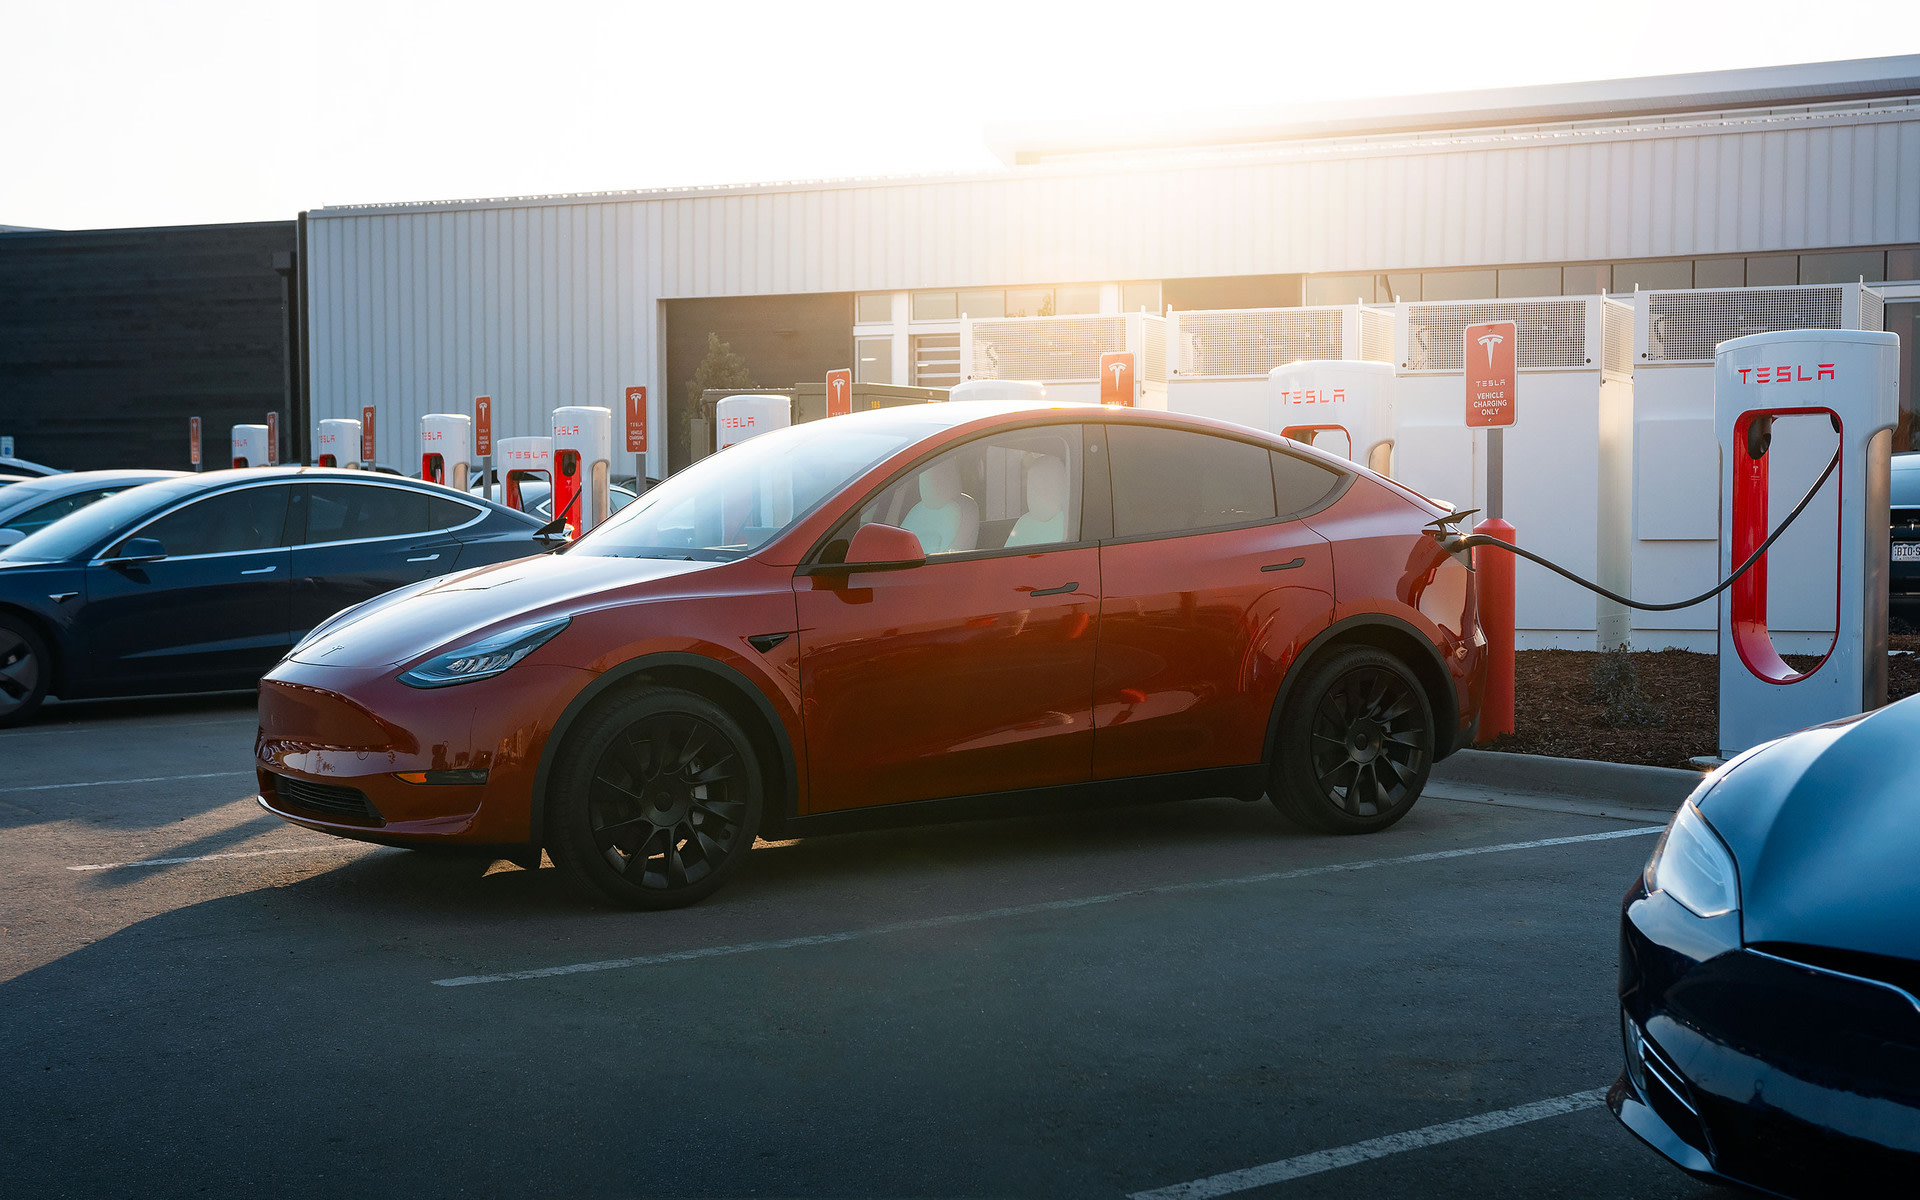 Red Model Y charging via Supercharger in a parking lot